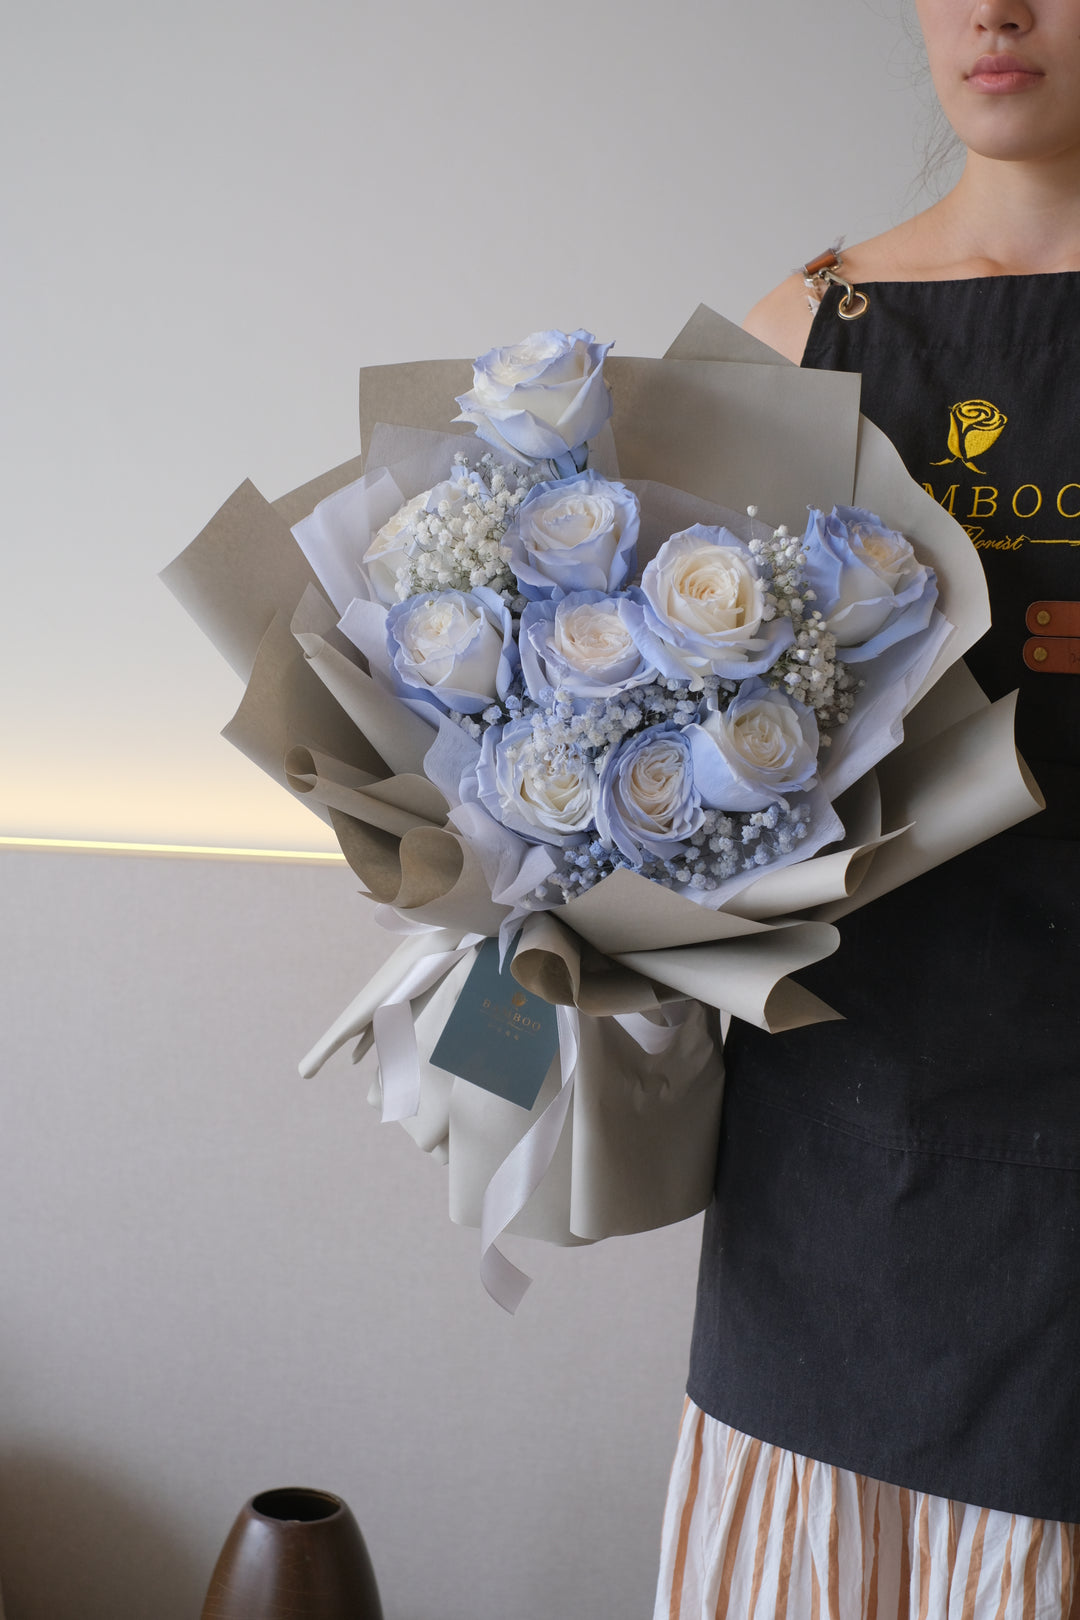 Image of a captivating bouquet featuring vibrant blue roses paired with delicate clusters of baby's breath, creating an enchanting and unique floral arrangement